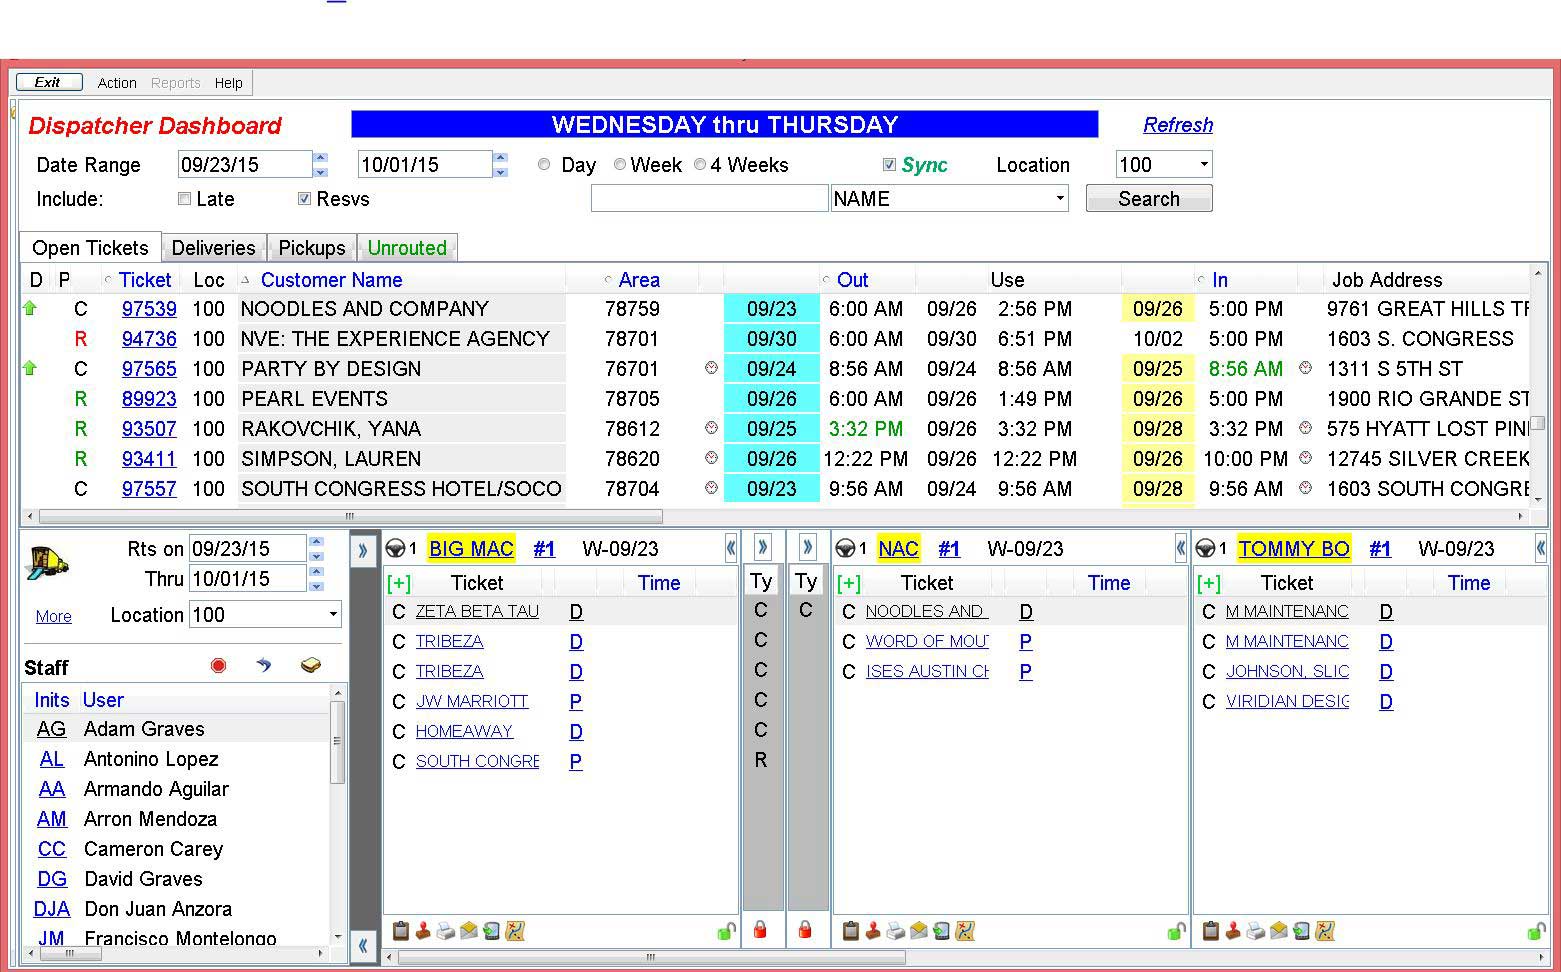 Alert Software - Alert Dispatcher Dashboard. Load trucks, assign drivers and helpers, all from a fun, graphical, drag-and-drop screen.